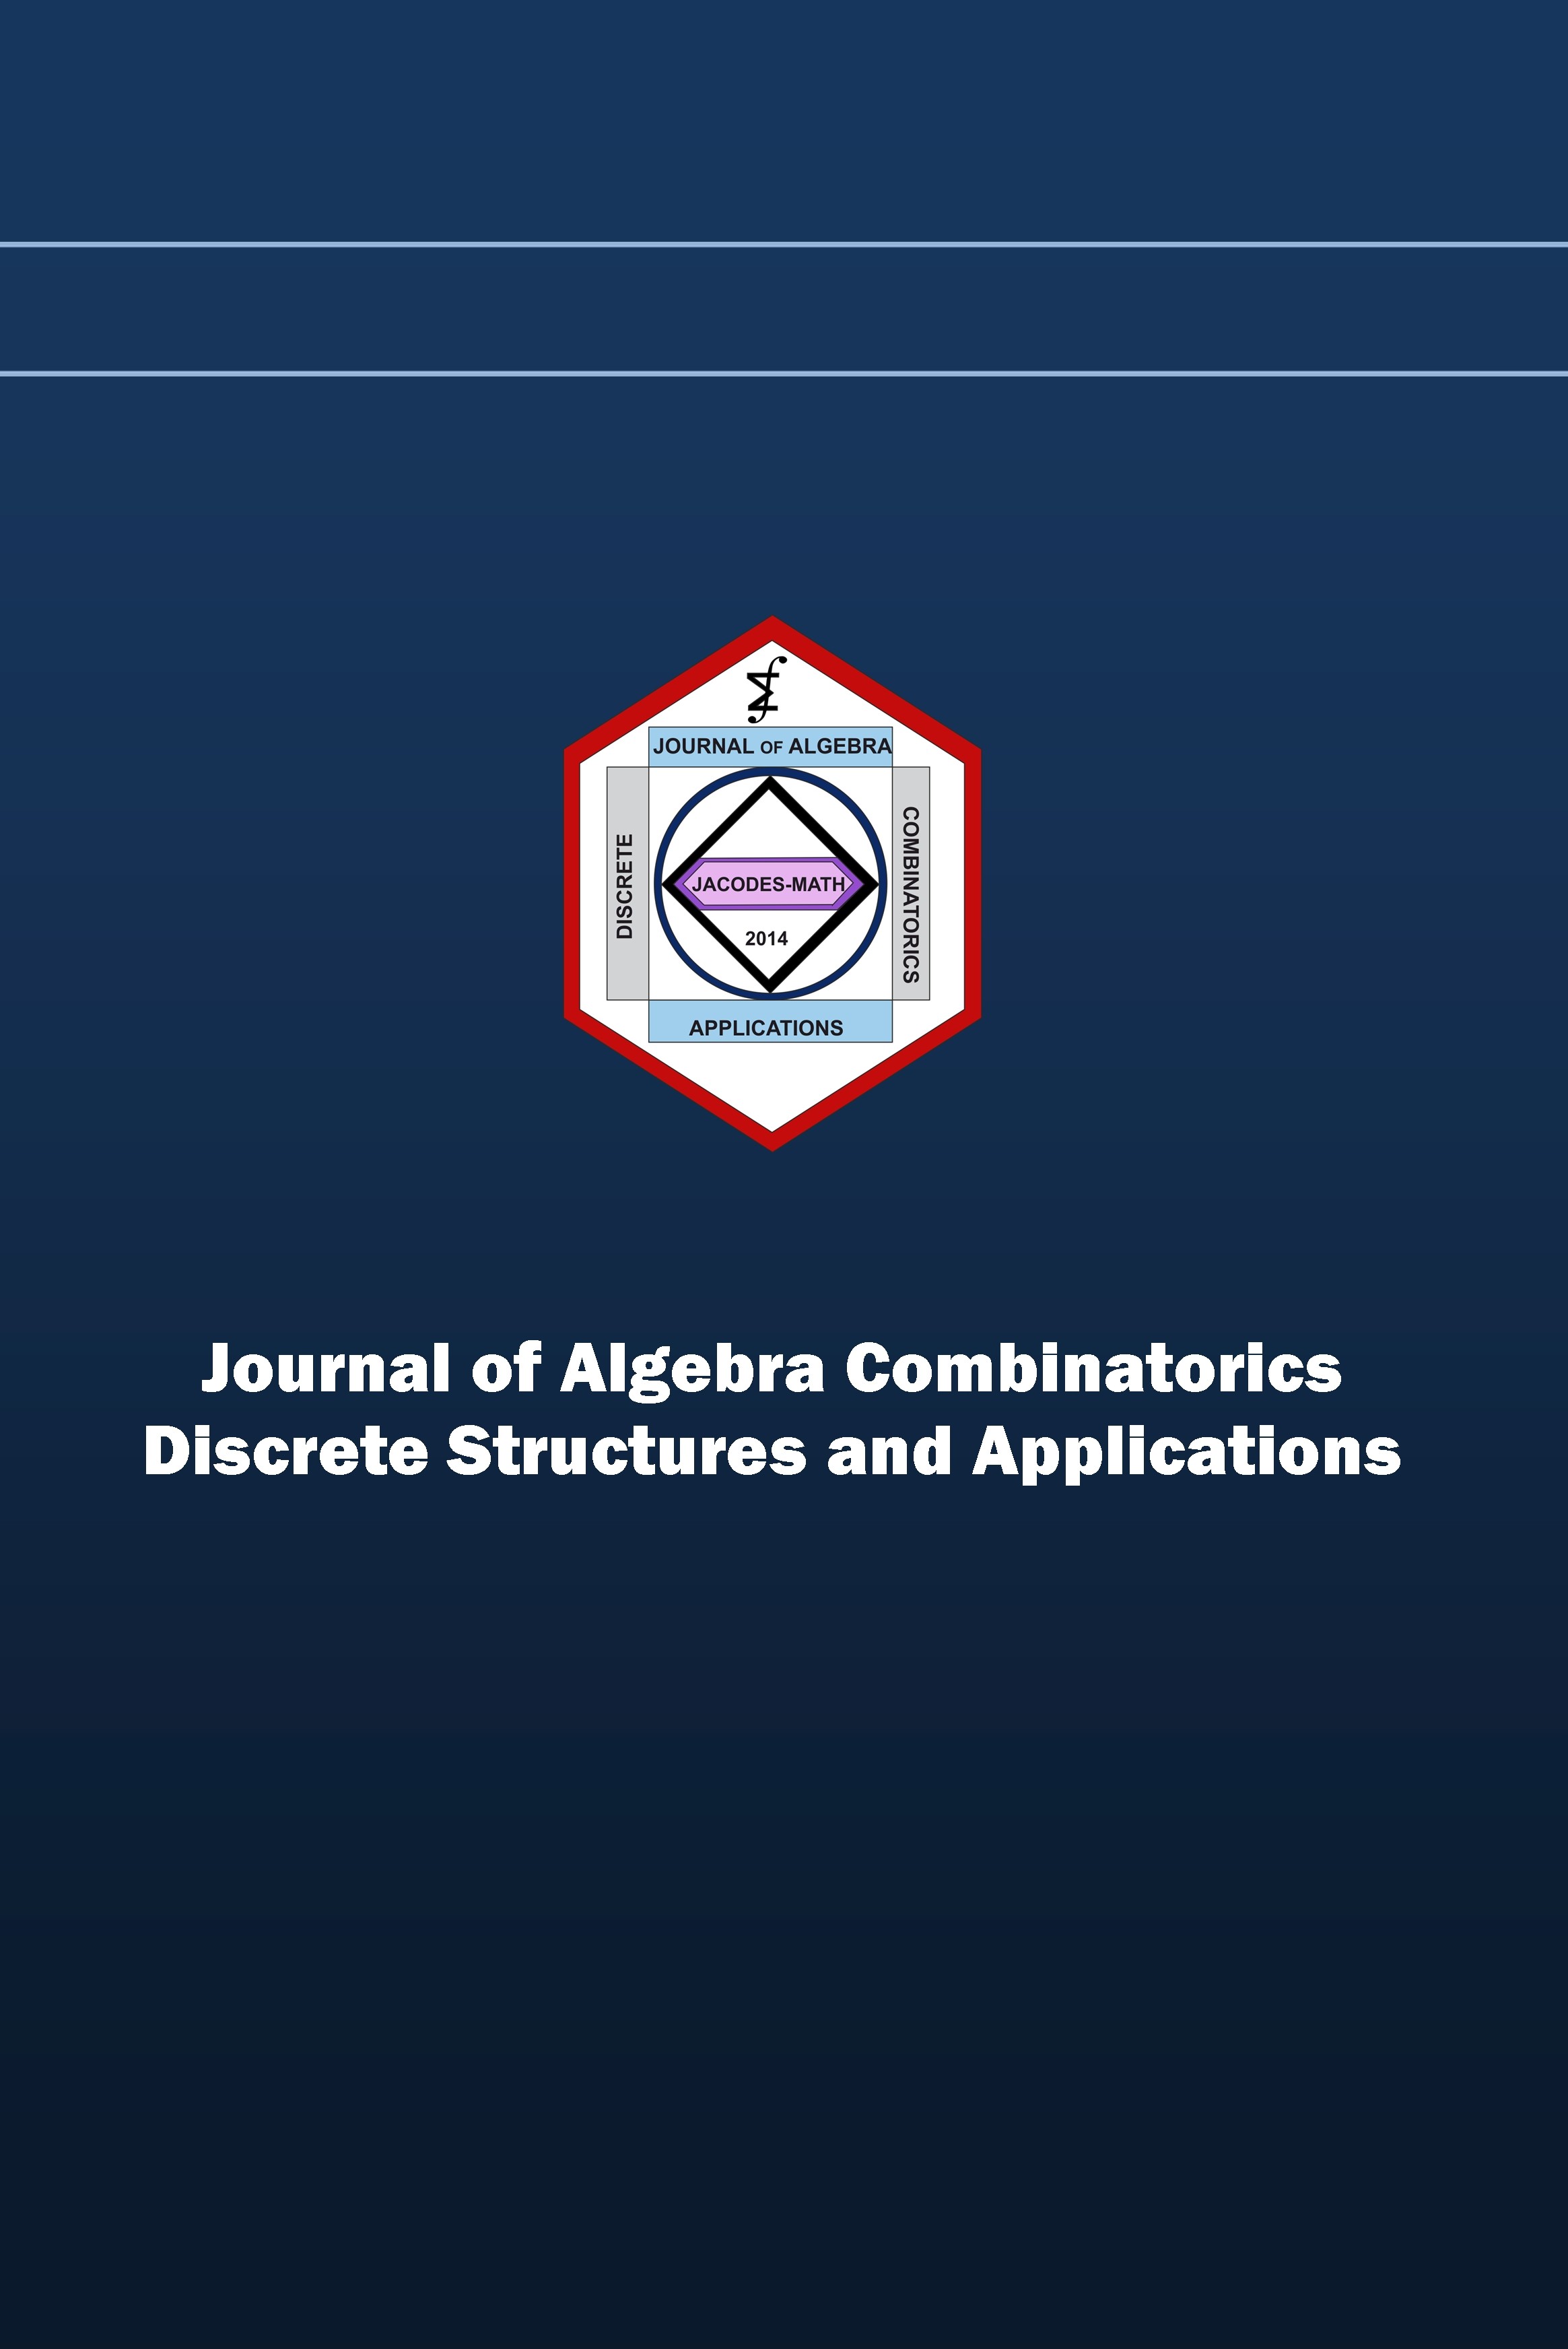 Journal of Algebra Combinatorics Discrete Structures and Applications-Cover